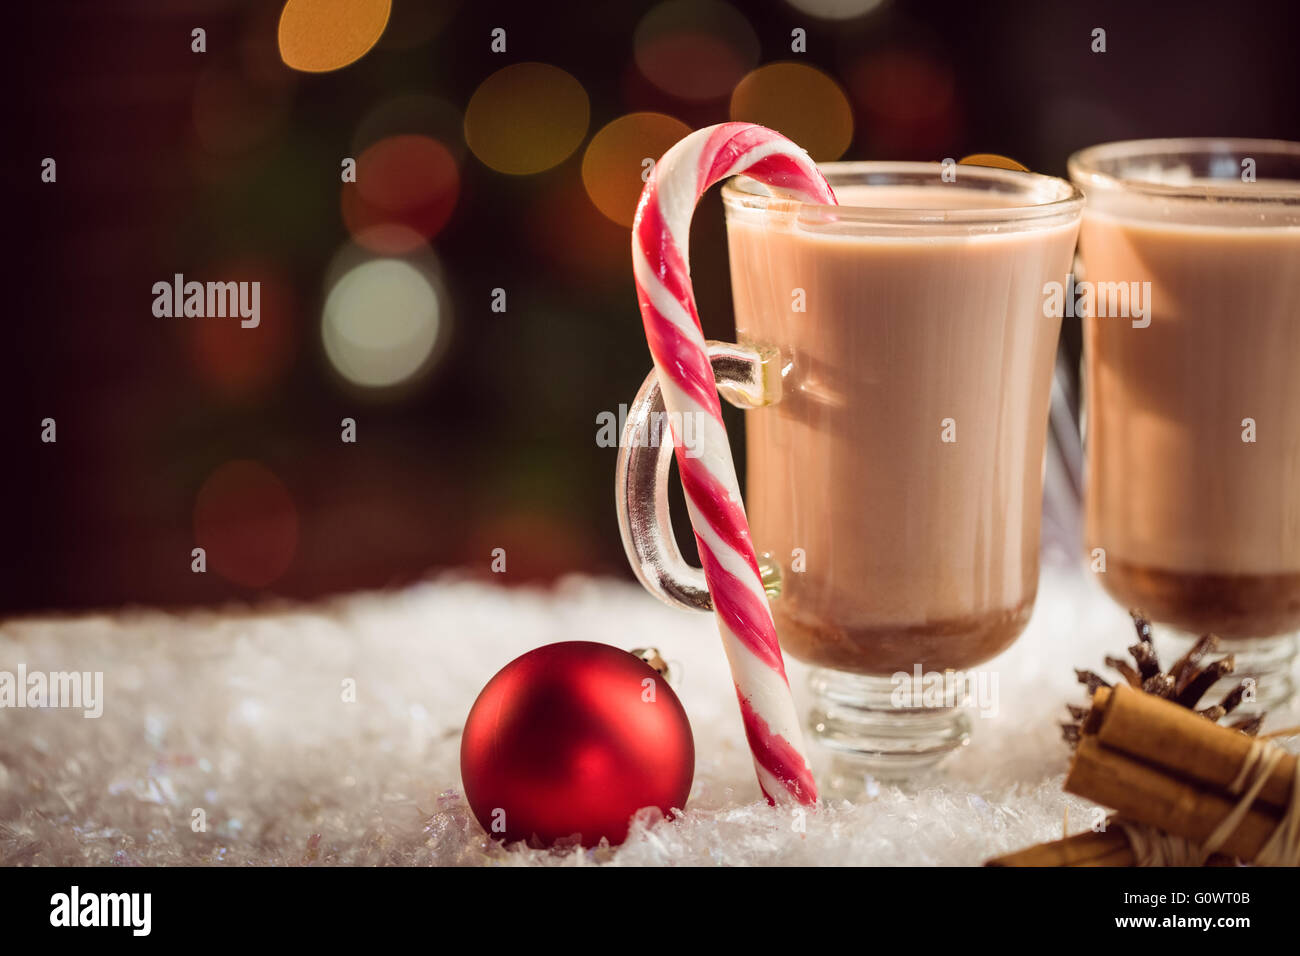 Extreme close up view of composite image of hot chocolates Stock Photo